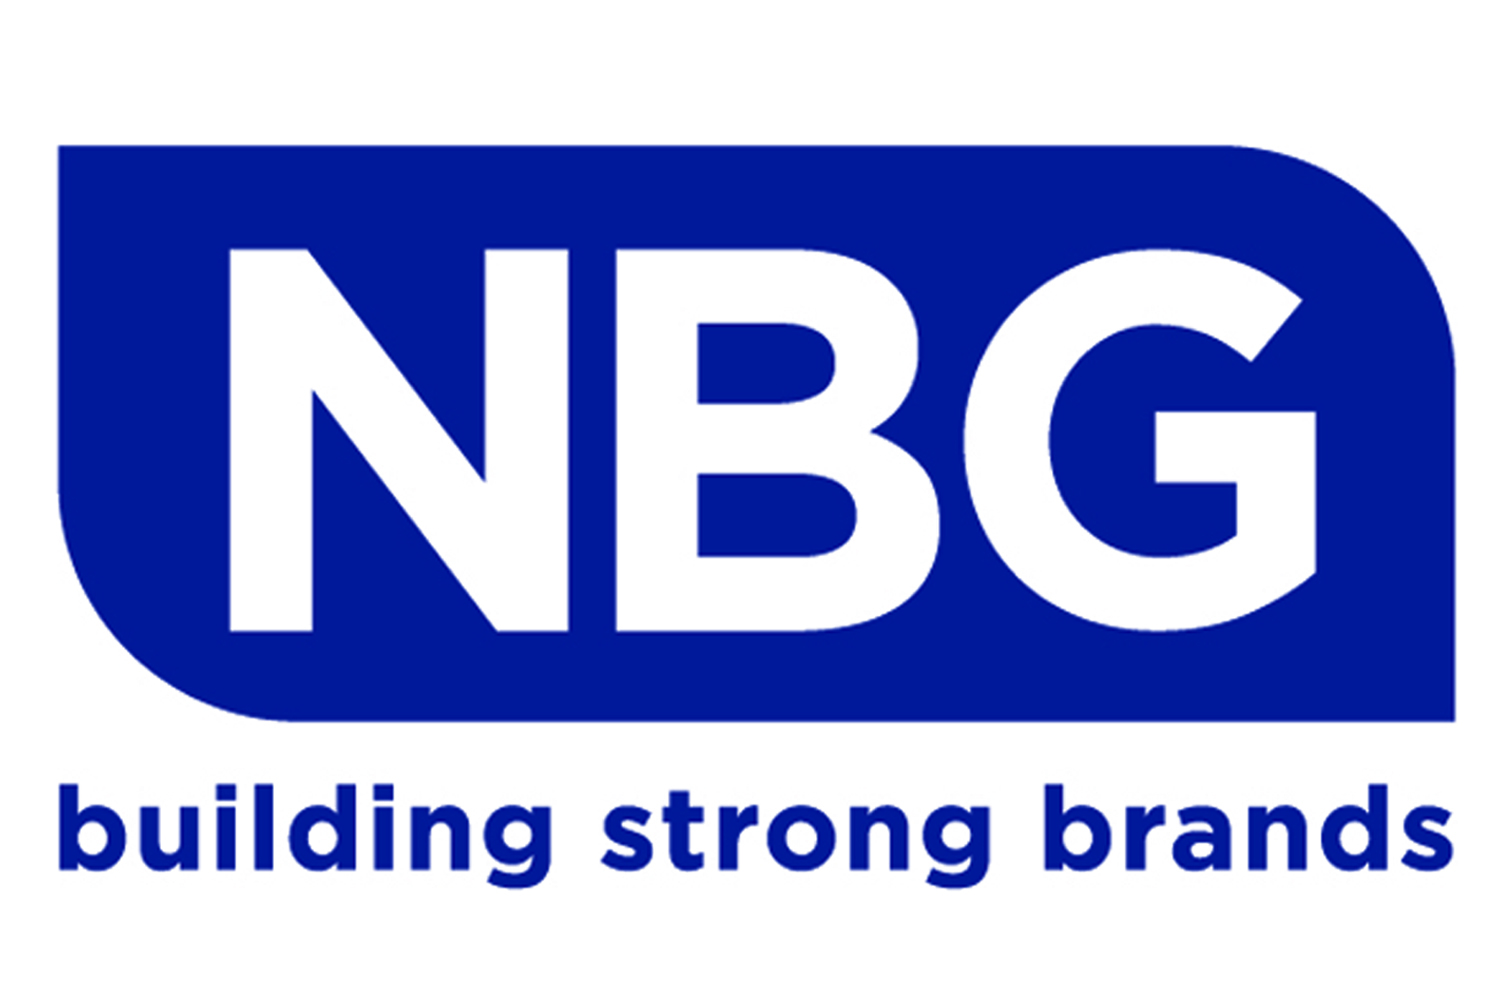 Owlett-Jaton to Exhibit at The NBG Annual Conference and Exhibition 